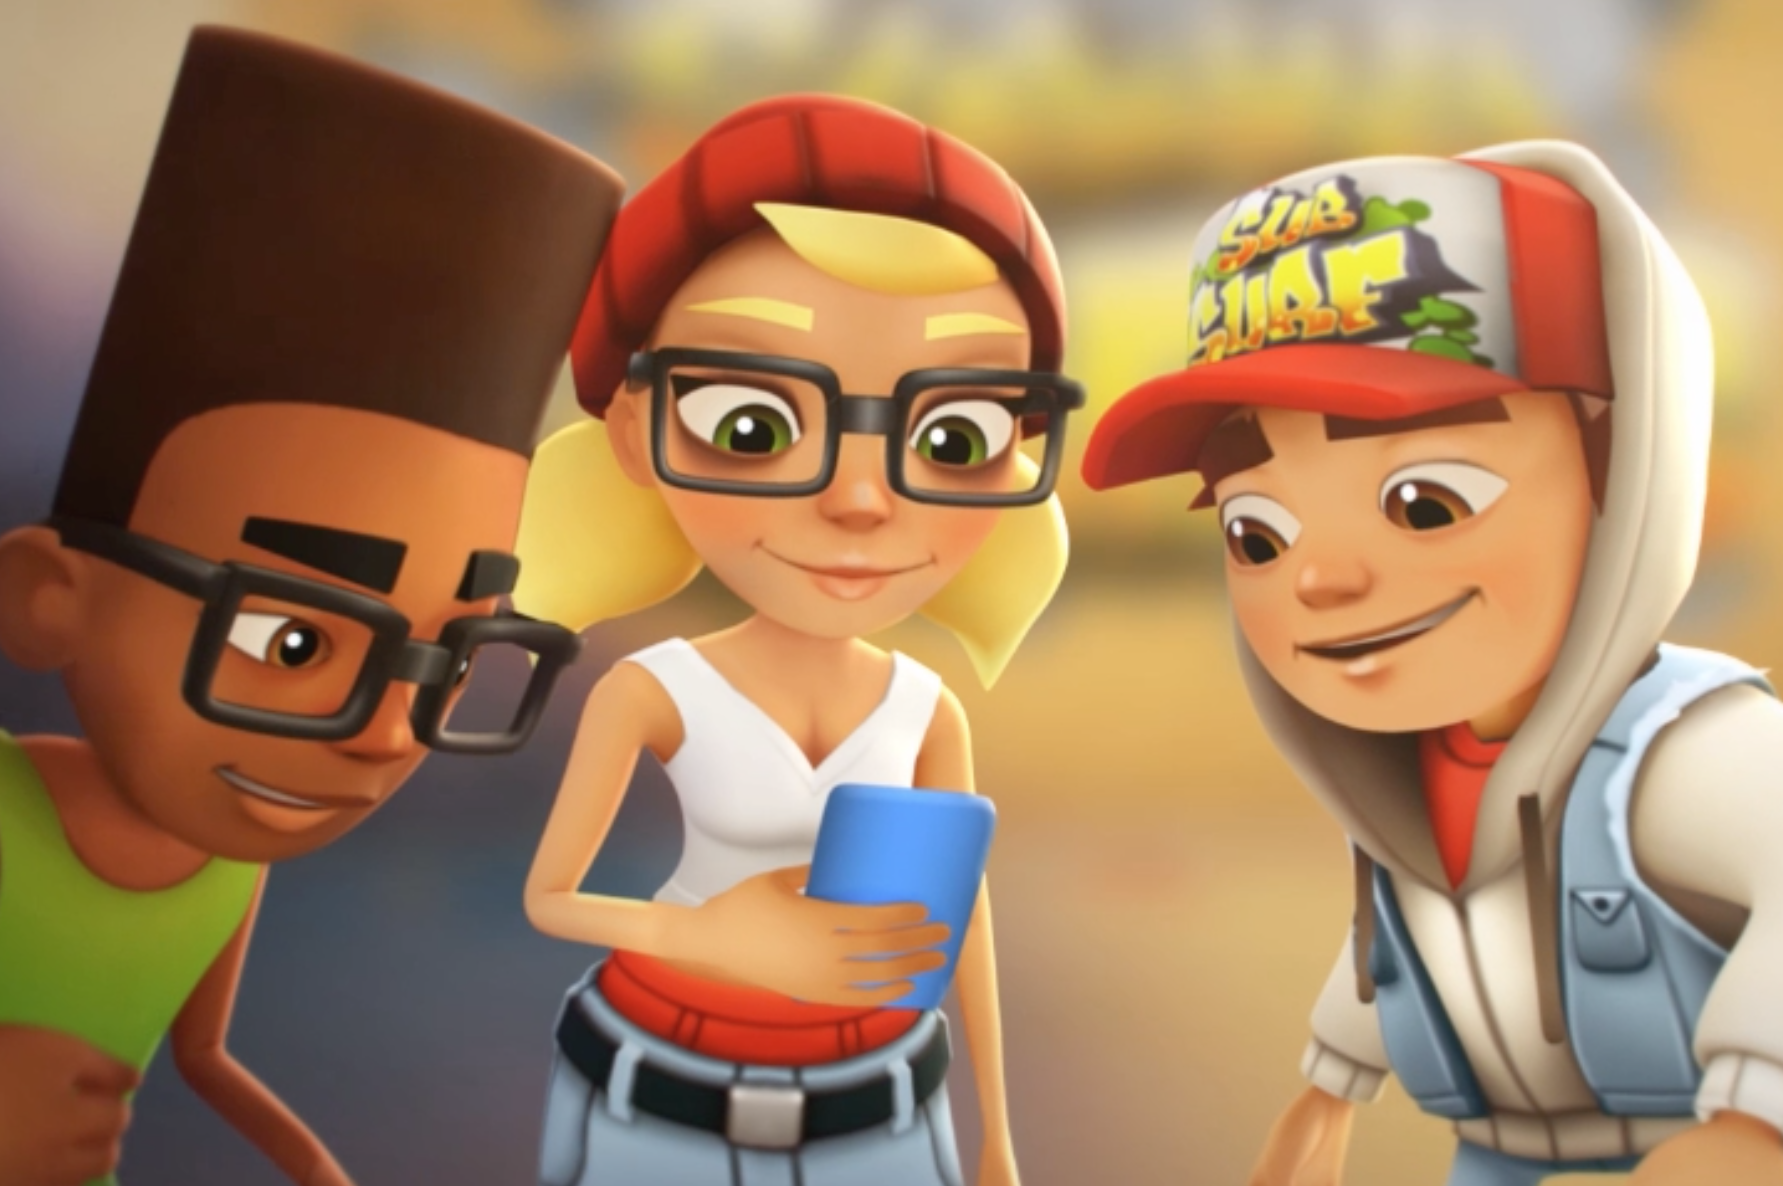 Subway Surfers by Sybo Games ApS  Subway surfers, Subway surfers